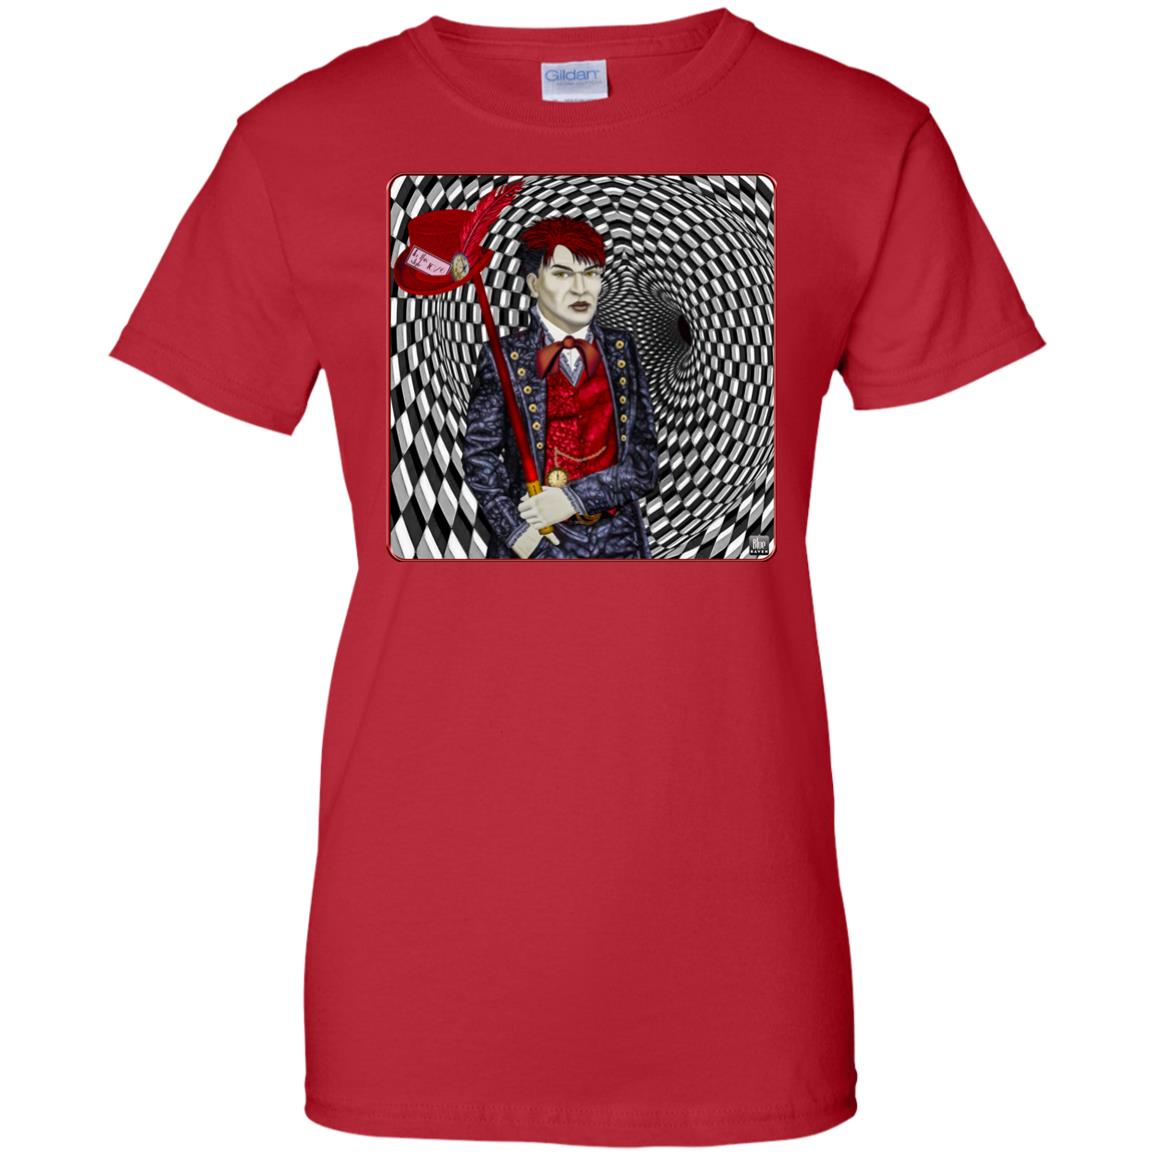 PORTRAIT OF A MAD HATTER - Women's Relaxed Fit T-Shirt